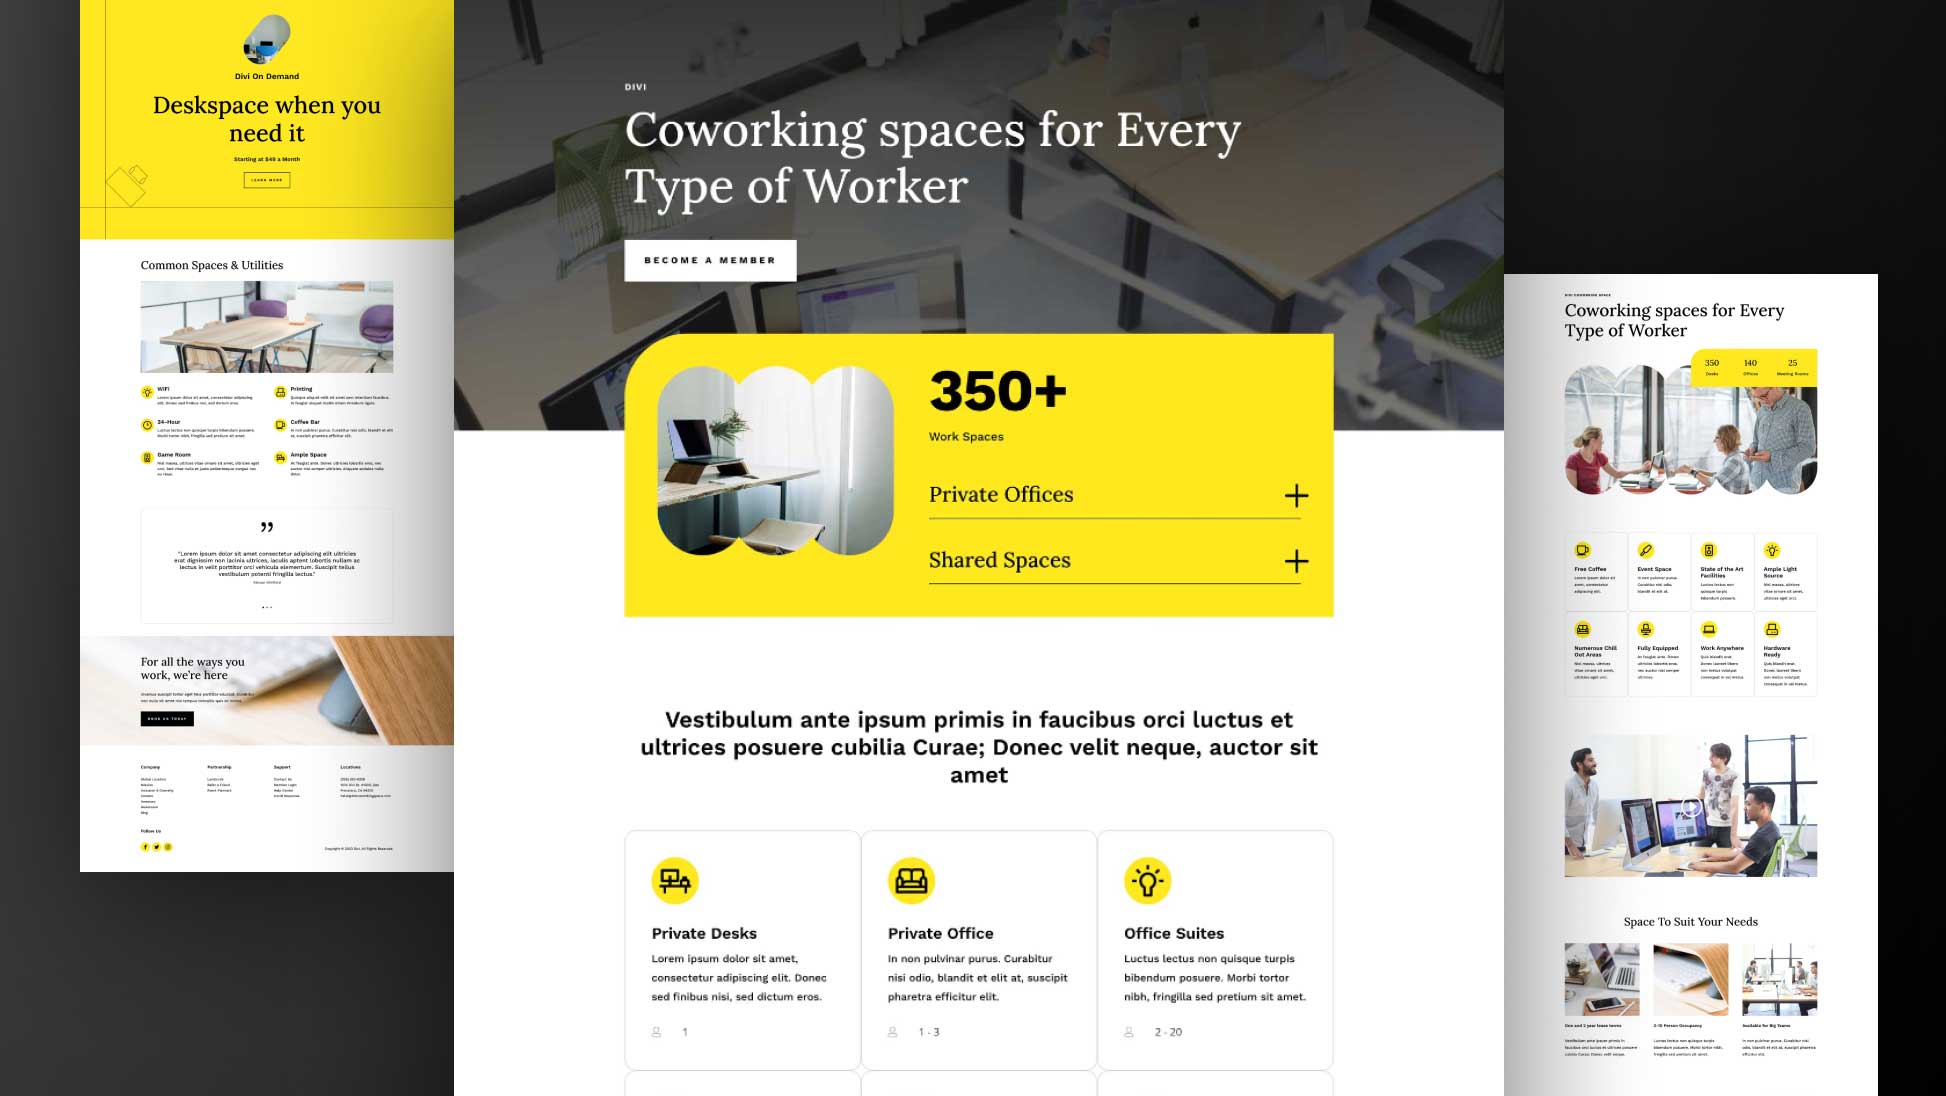 Get a Free Coworking Layout Pack for Divi